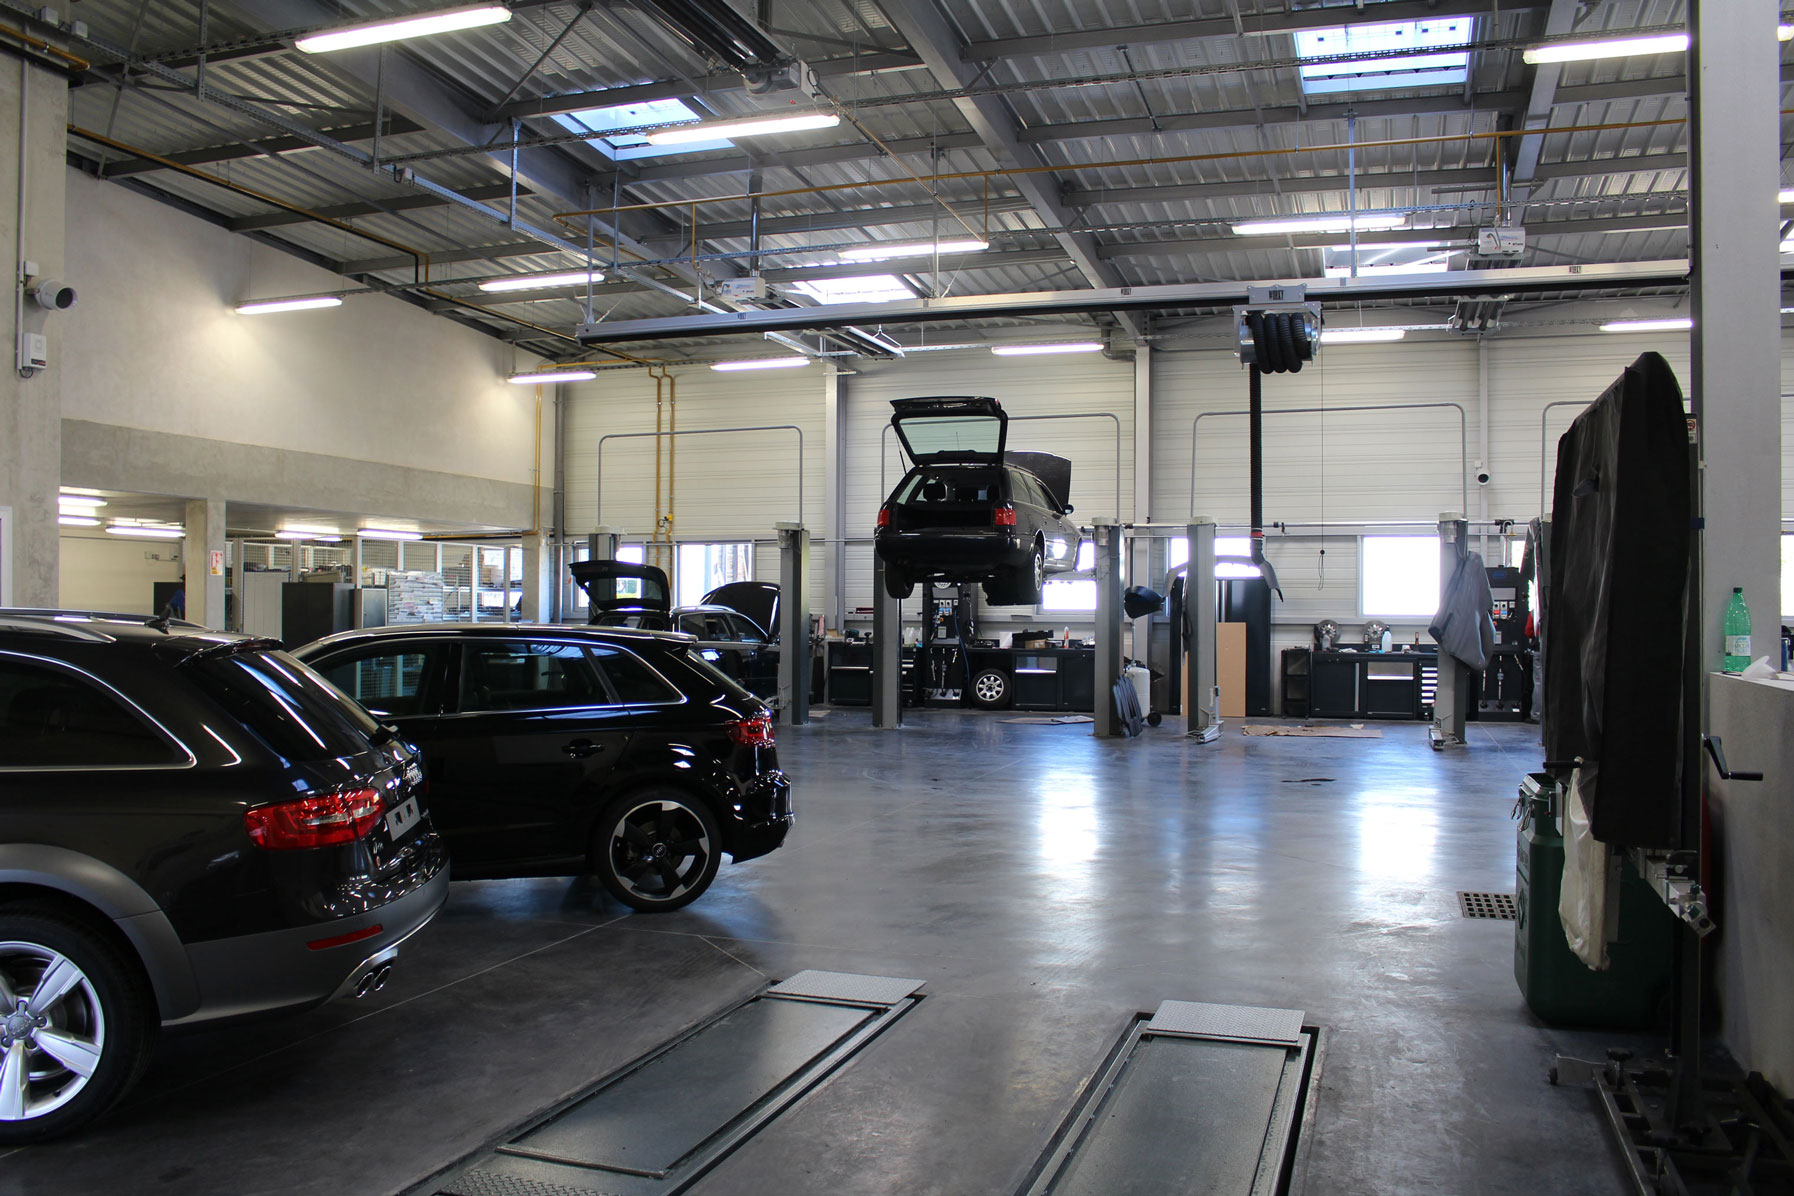 Vehicles placed in an AUDI dealer with some cars undergoing work on 2-post lifts